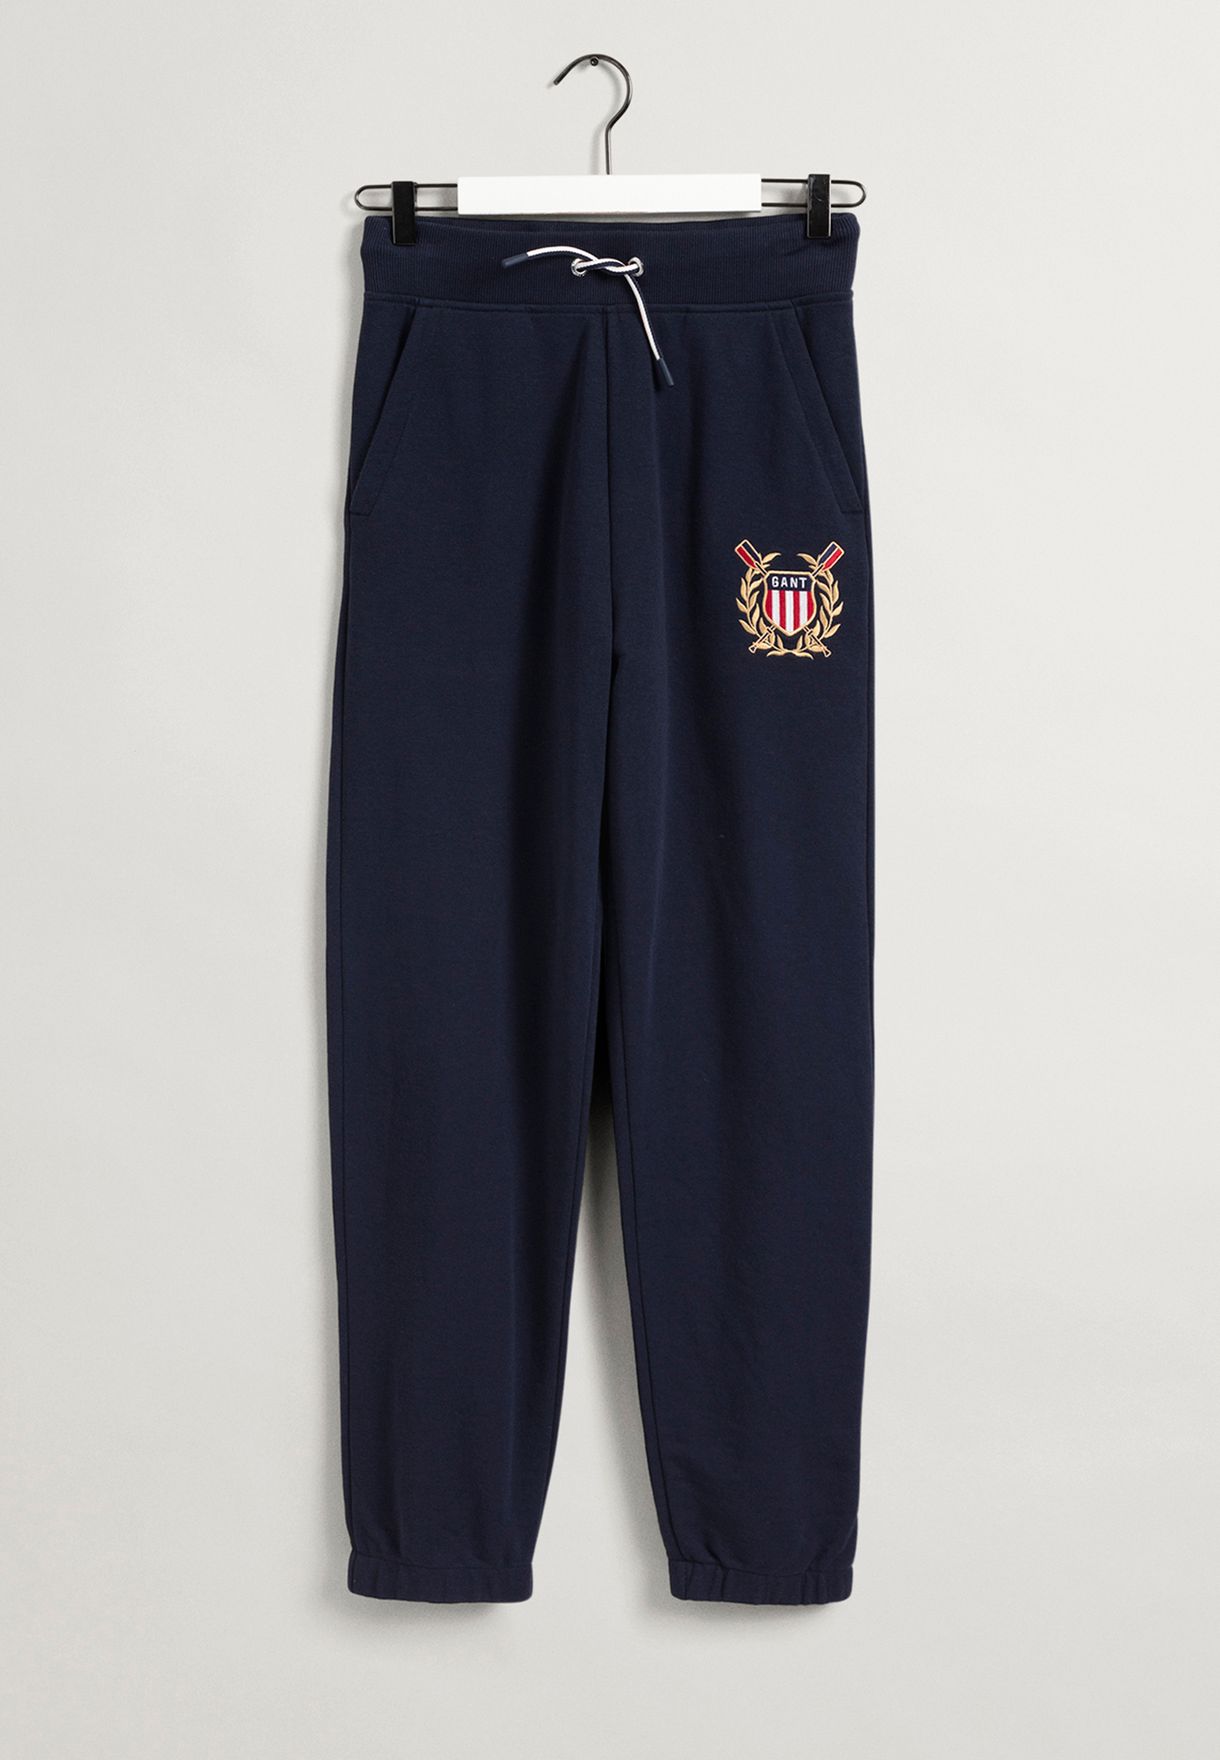 Youth Embroidered Logo Sweatpants